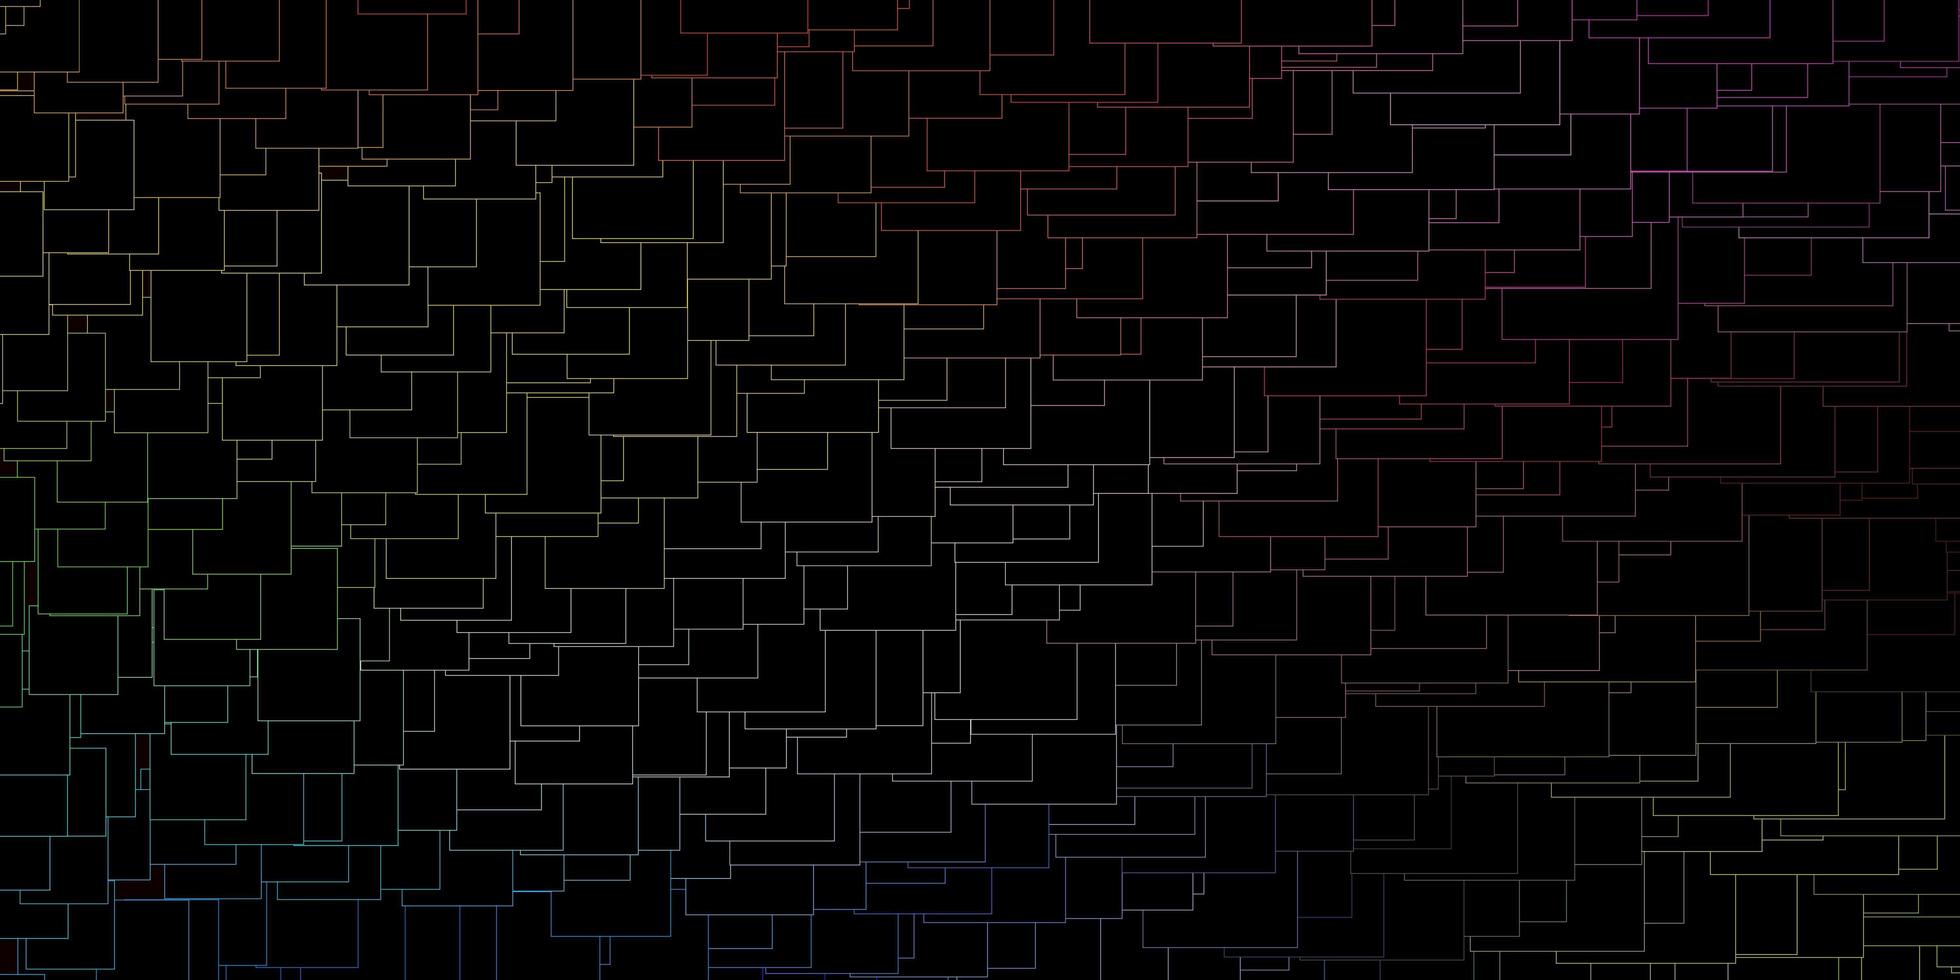 Dark Multicolor vector layout with lines, rectangles.